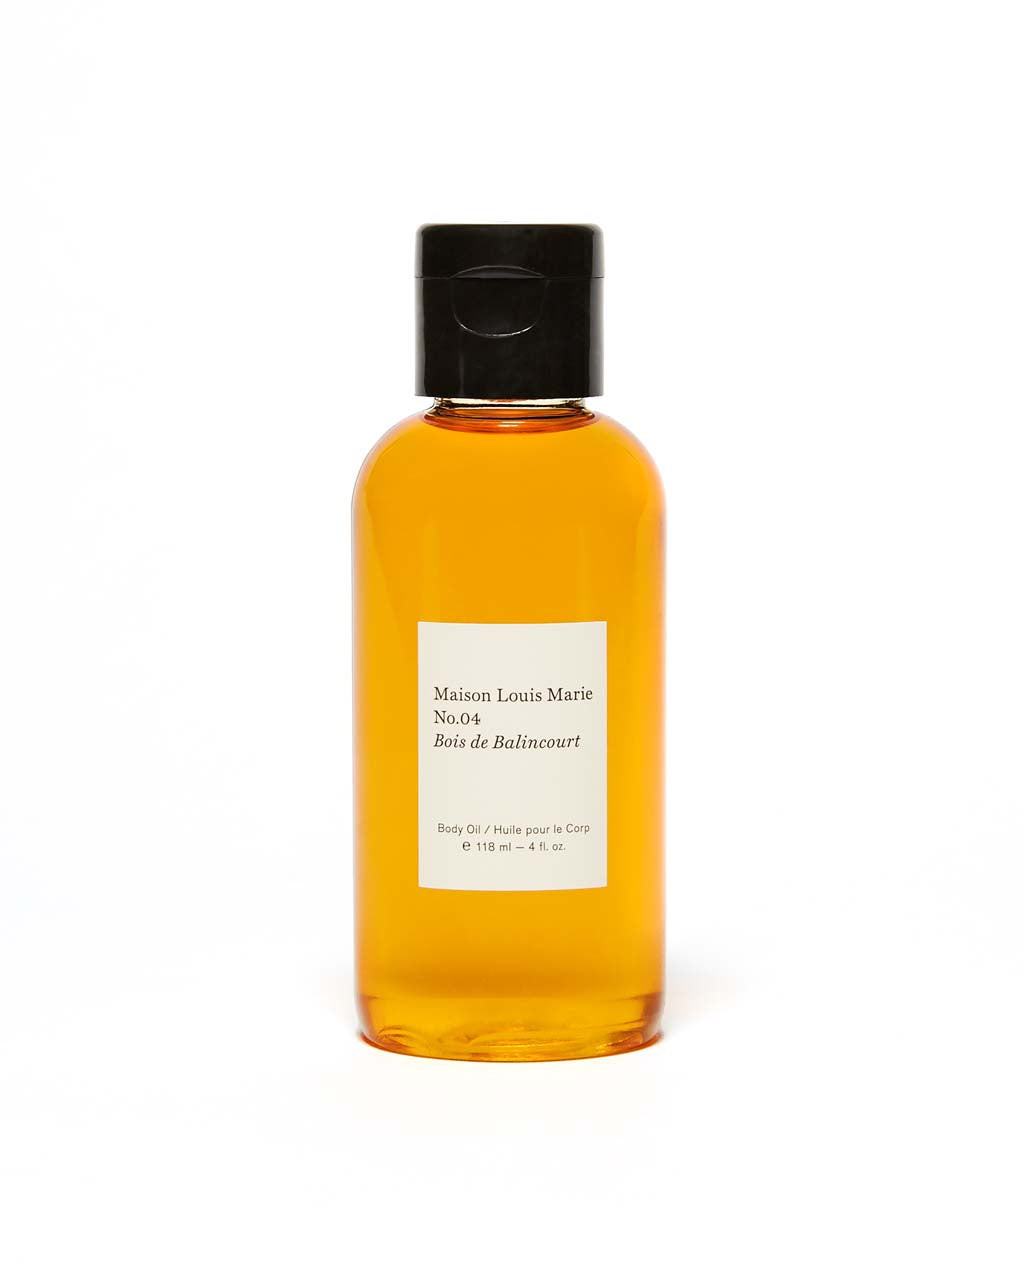 Body Oil - No. 4 by maison louis marie - body oil - www.bagssaleusa.com/product-category/wallets/